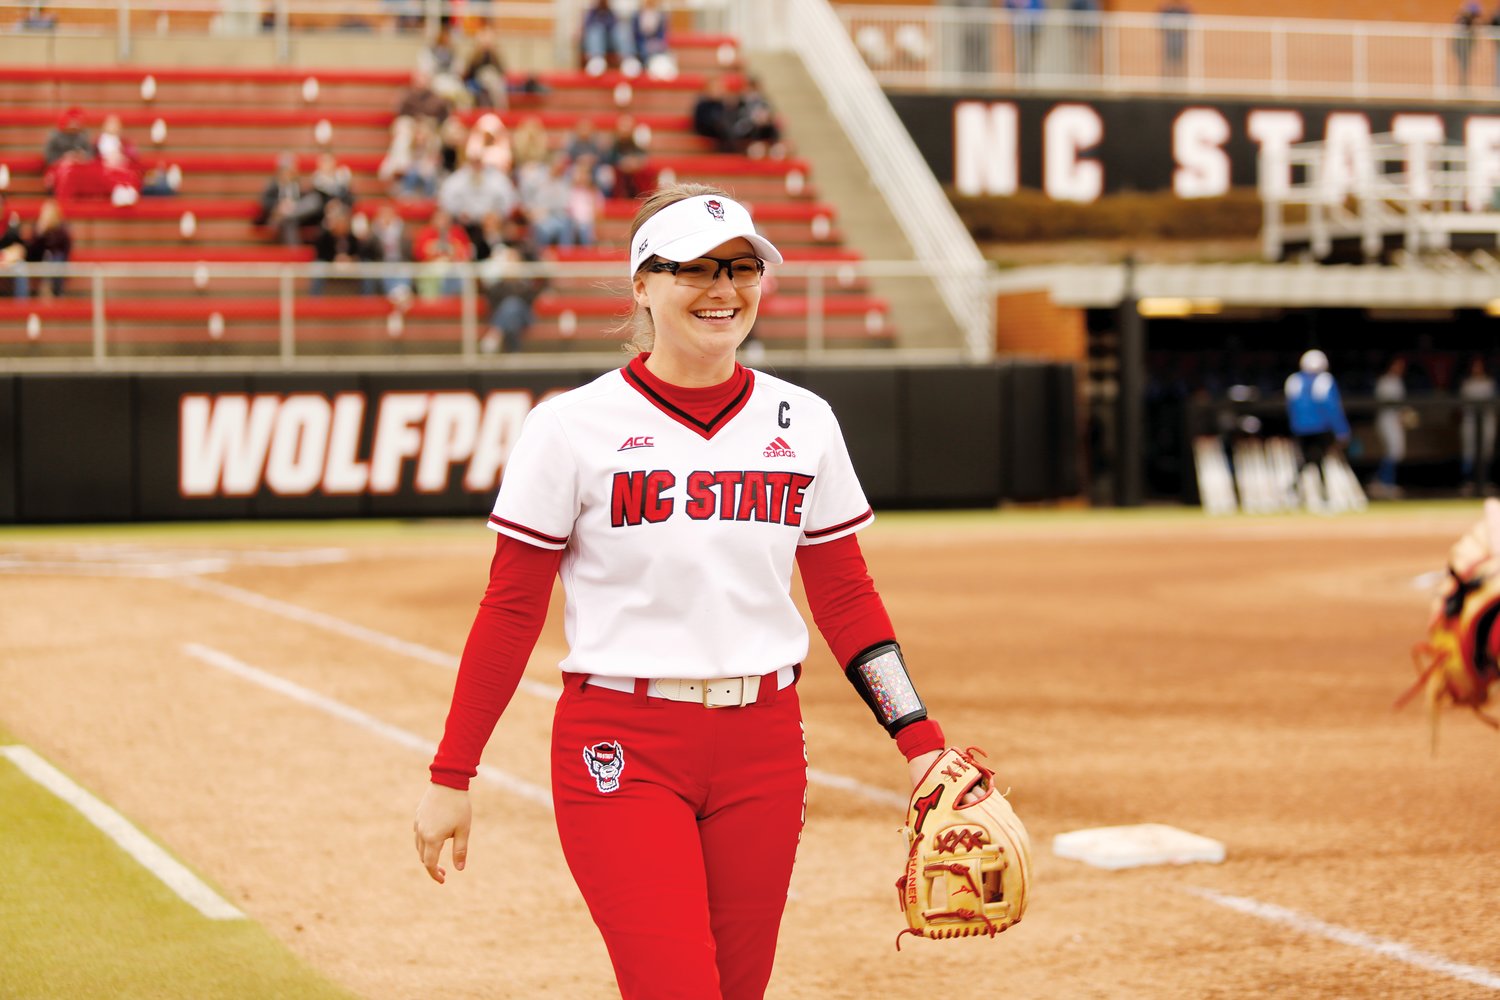 N.C. State outfielder Carson Shaner walks down the first base line on her way to the outfield in the Wolfpack's 12-4 loss to Delaware on Feb. 26. Shaner was 'in complete shock and honor' to be voted team captain for the 2021-22 season.